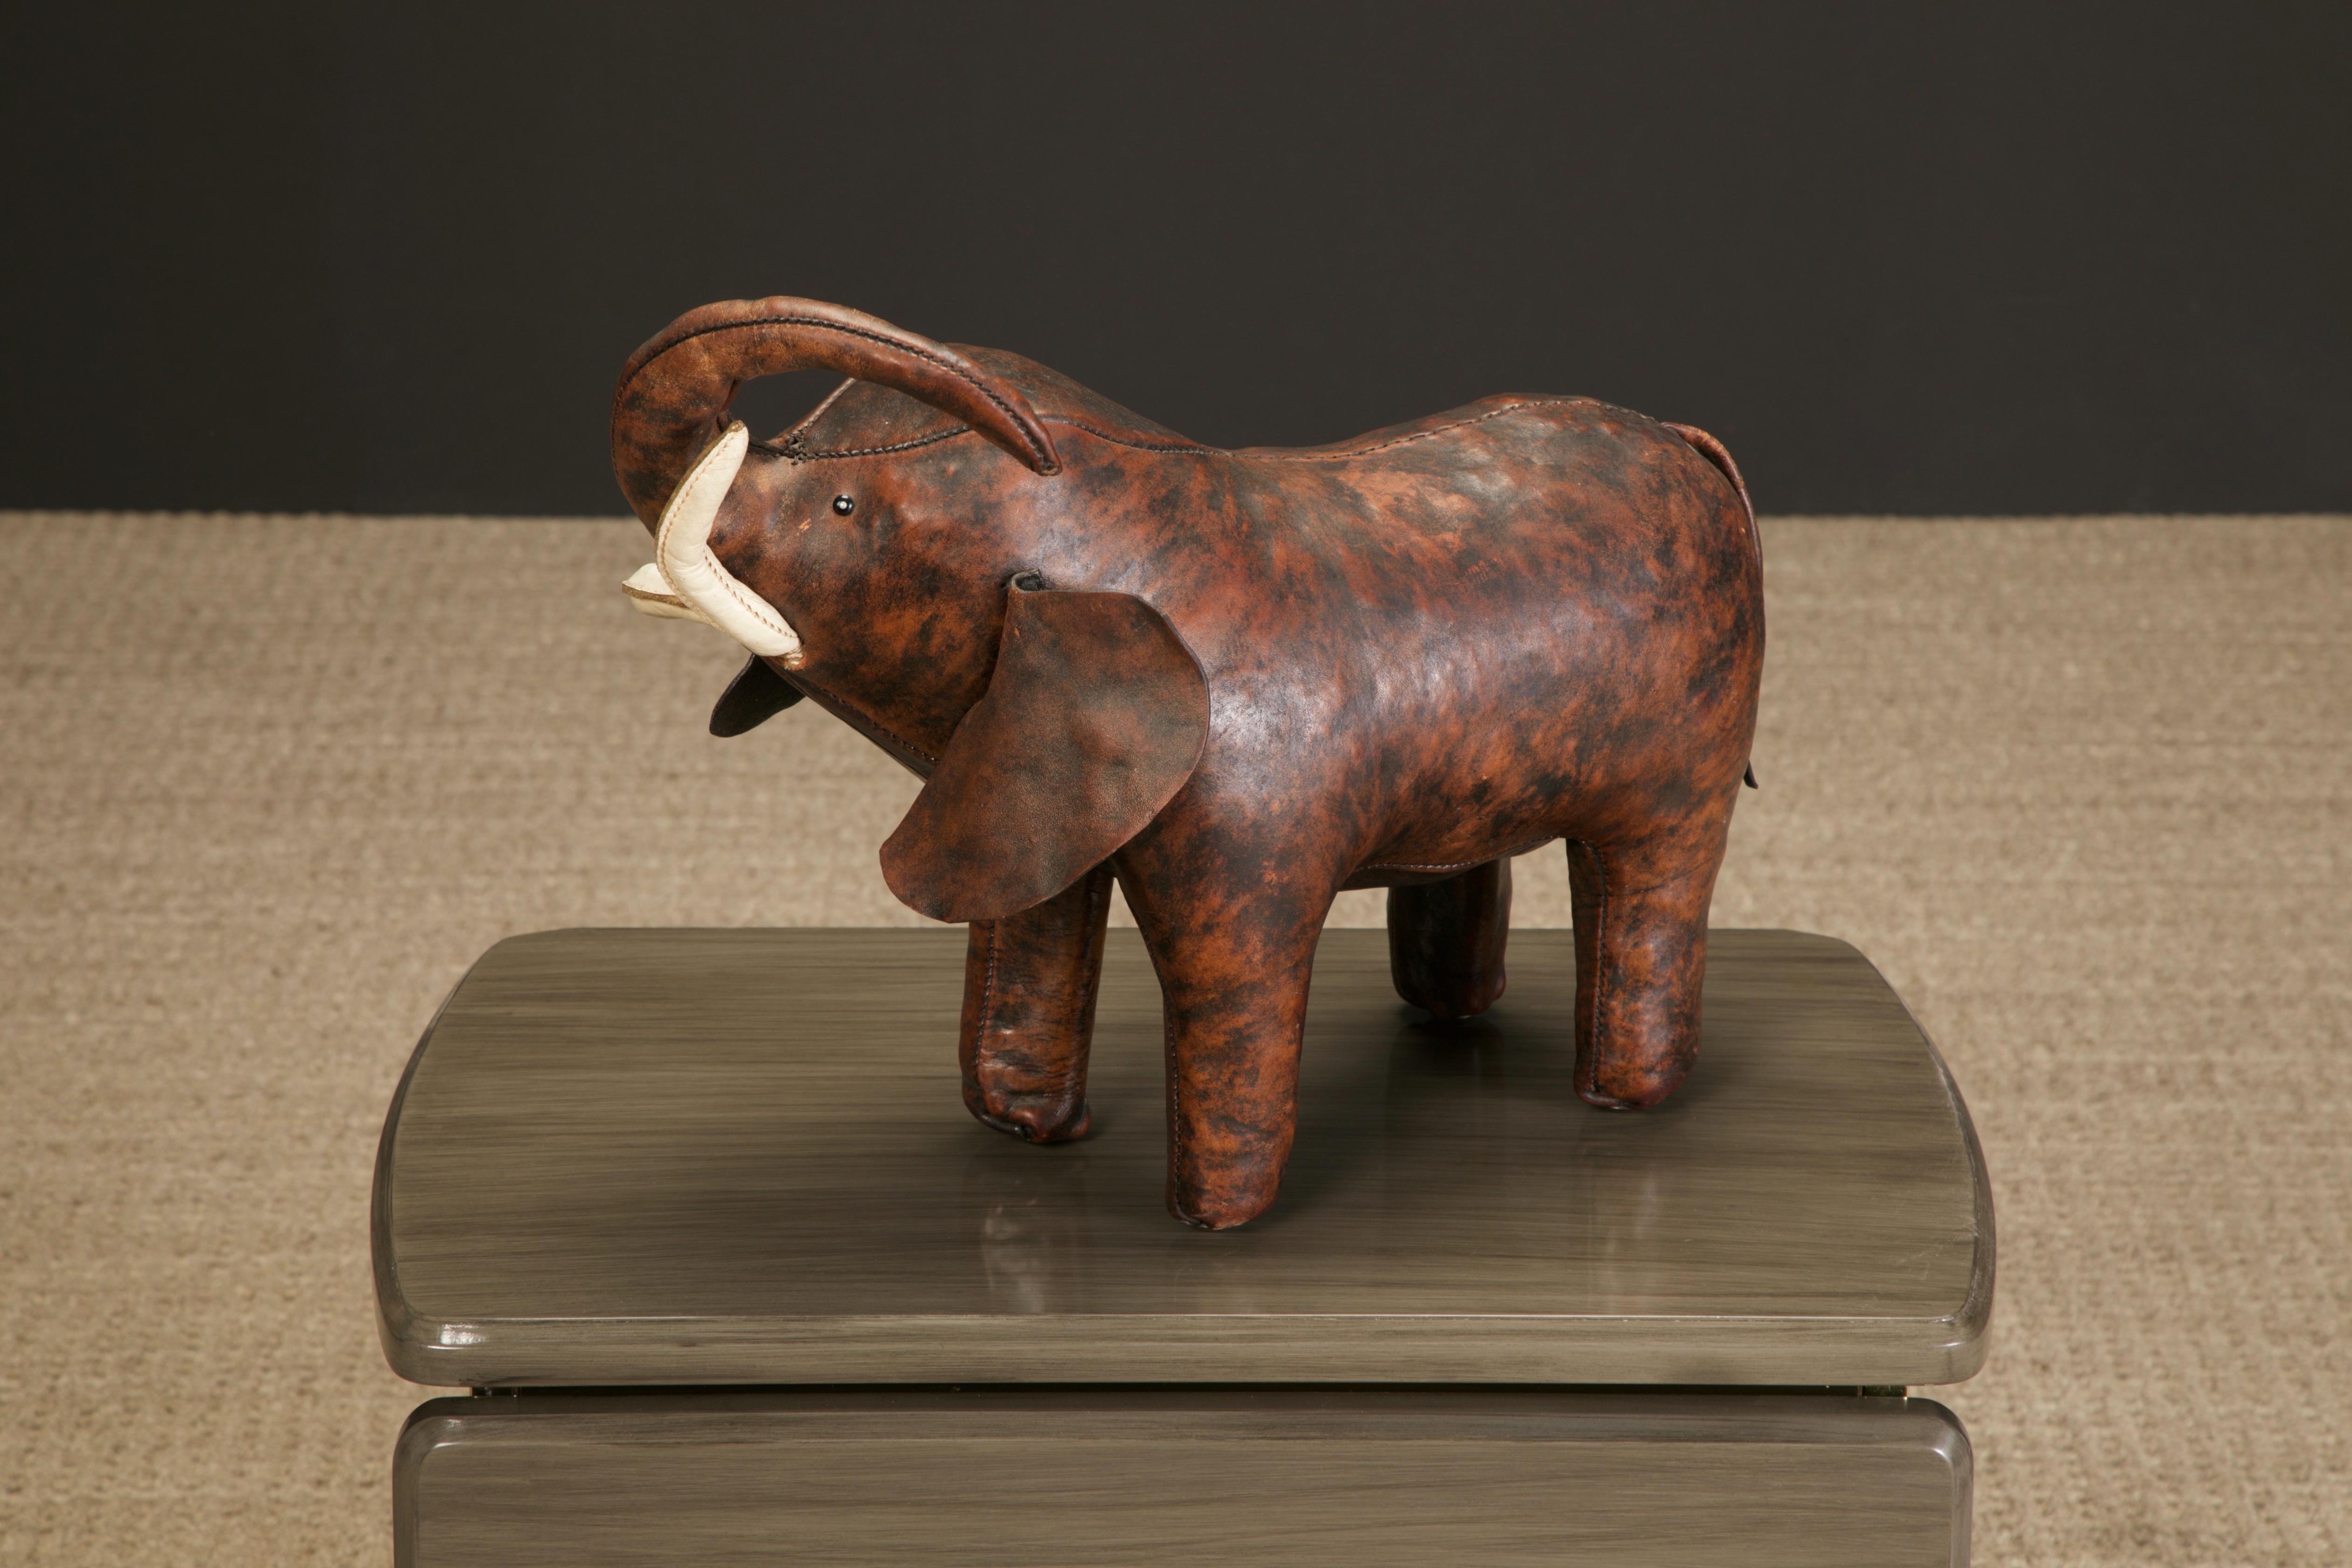 Mid-20th Century Leather Elephant Stool by Dimitri Omersa for Abercrombie & Fitch, c 1963, Signed